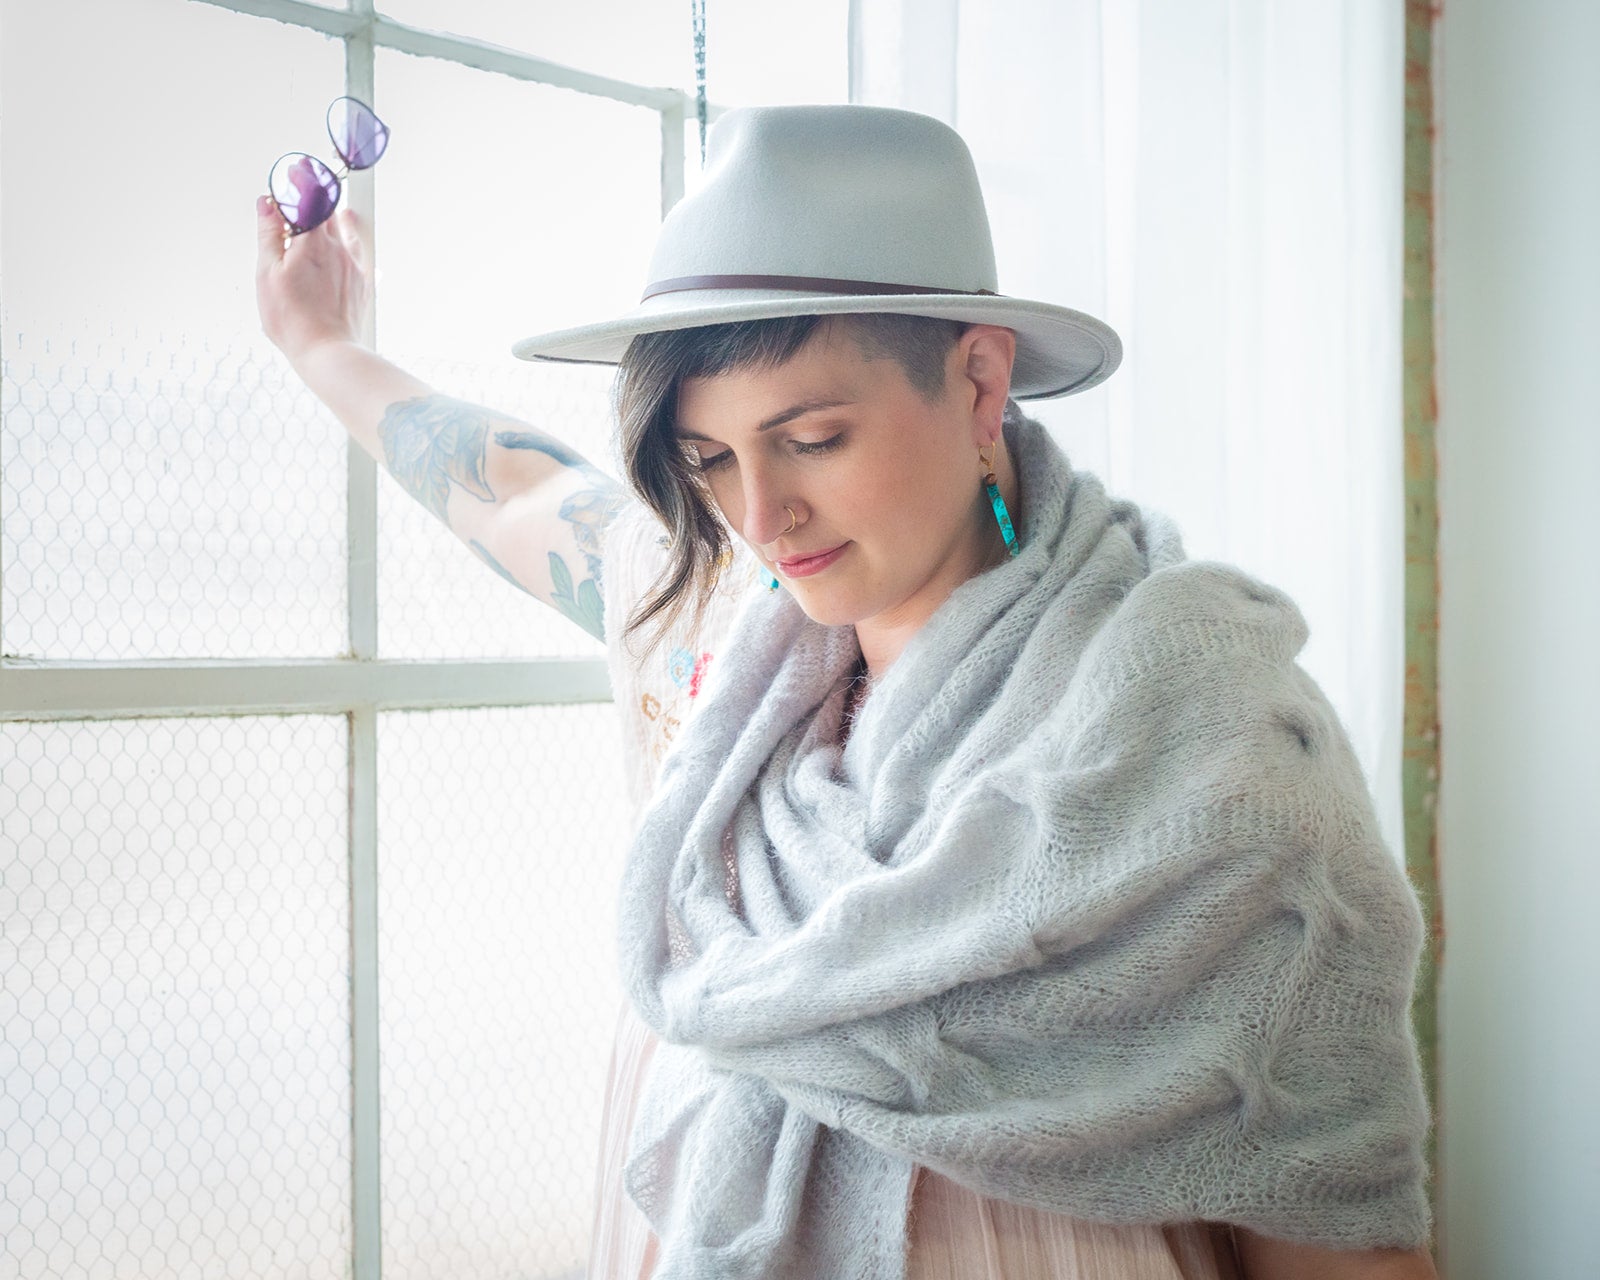 Jen, one hand against a window, wears a light blue, cable knit shawl with a white hat and a pink dress.